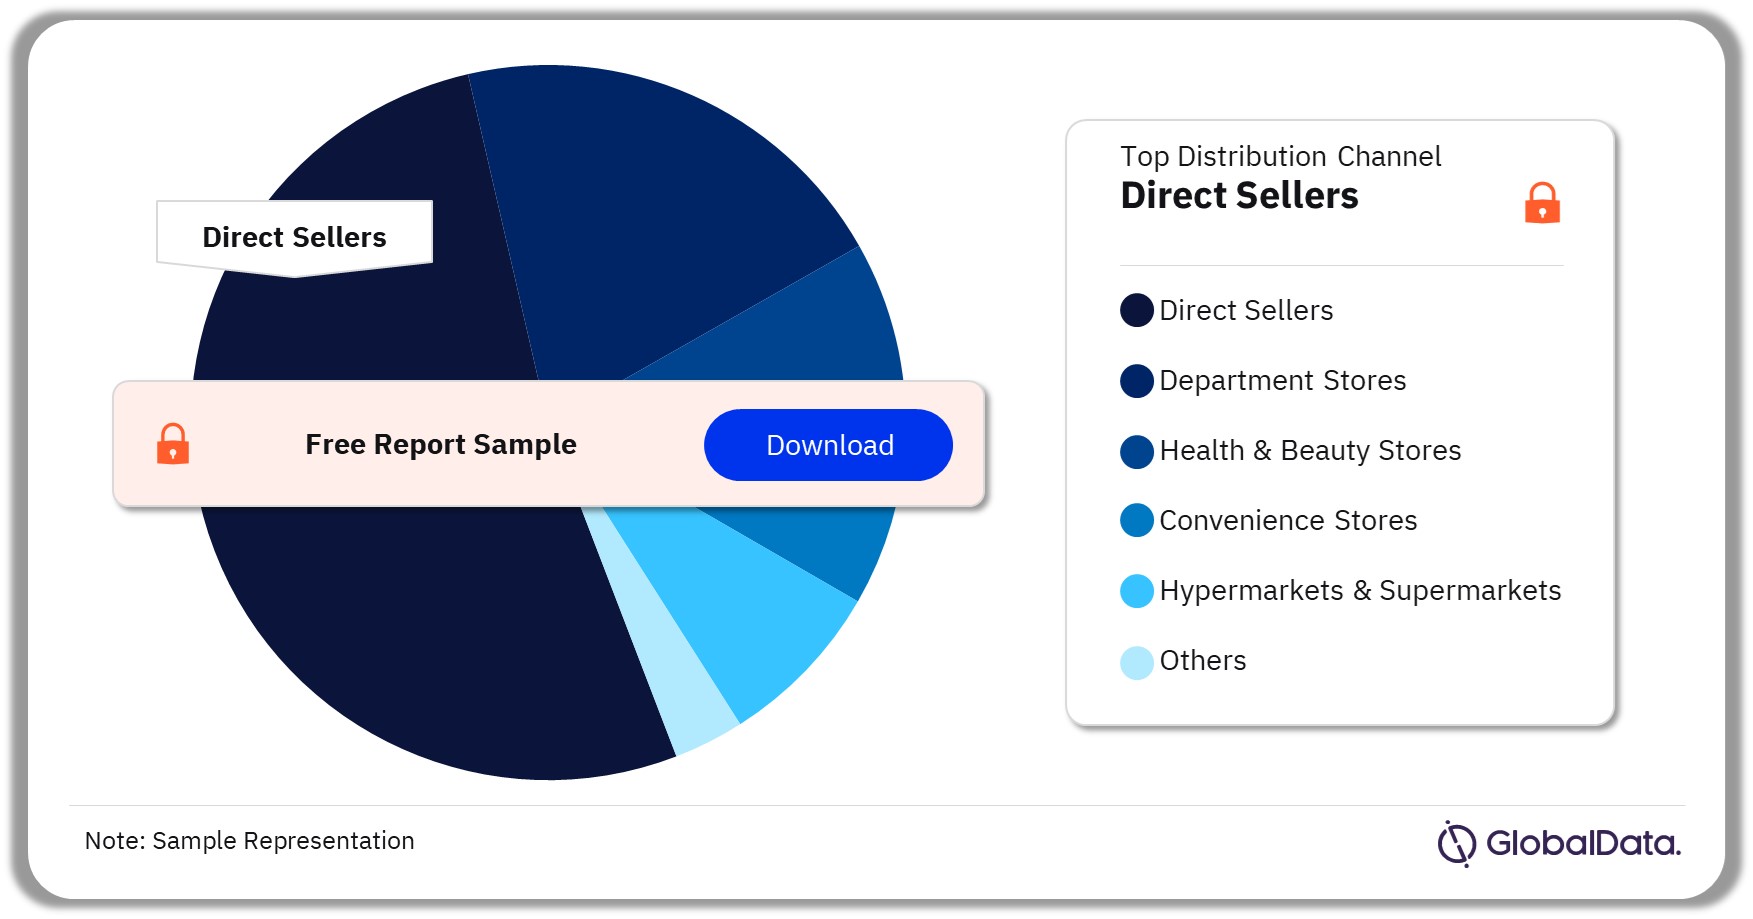 Thailand Make-up Market Analysis by Distribution Channels, 2021 (%)